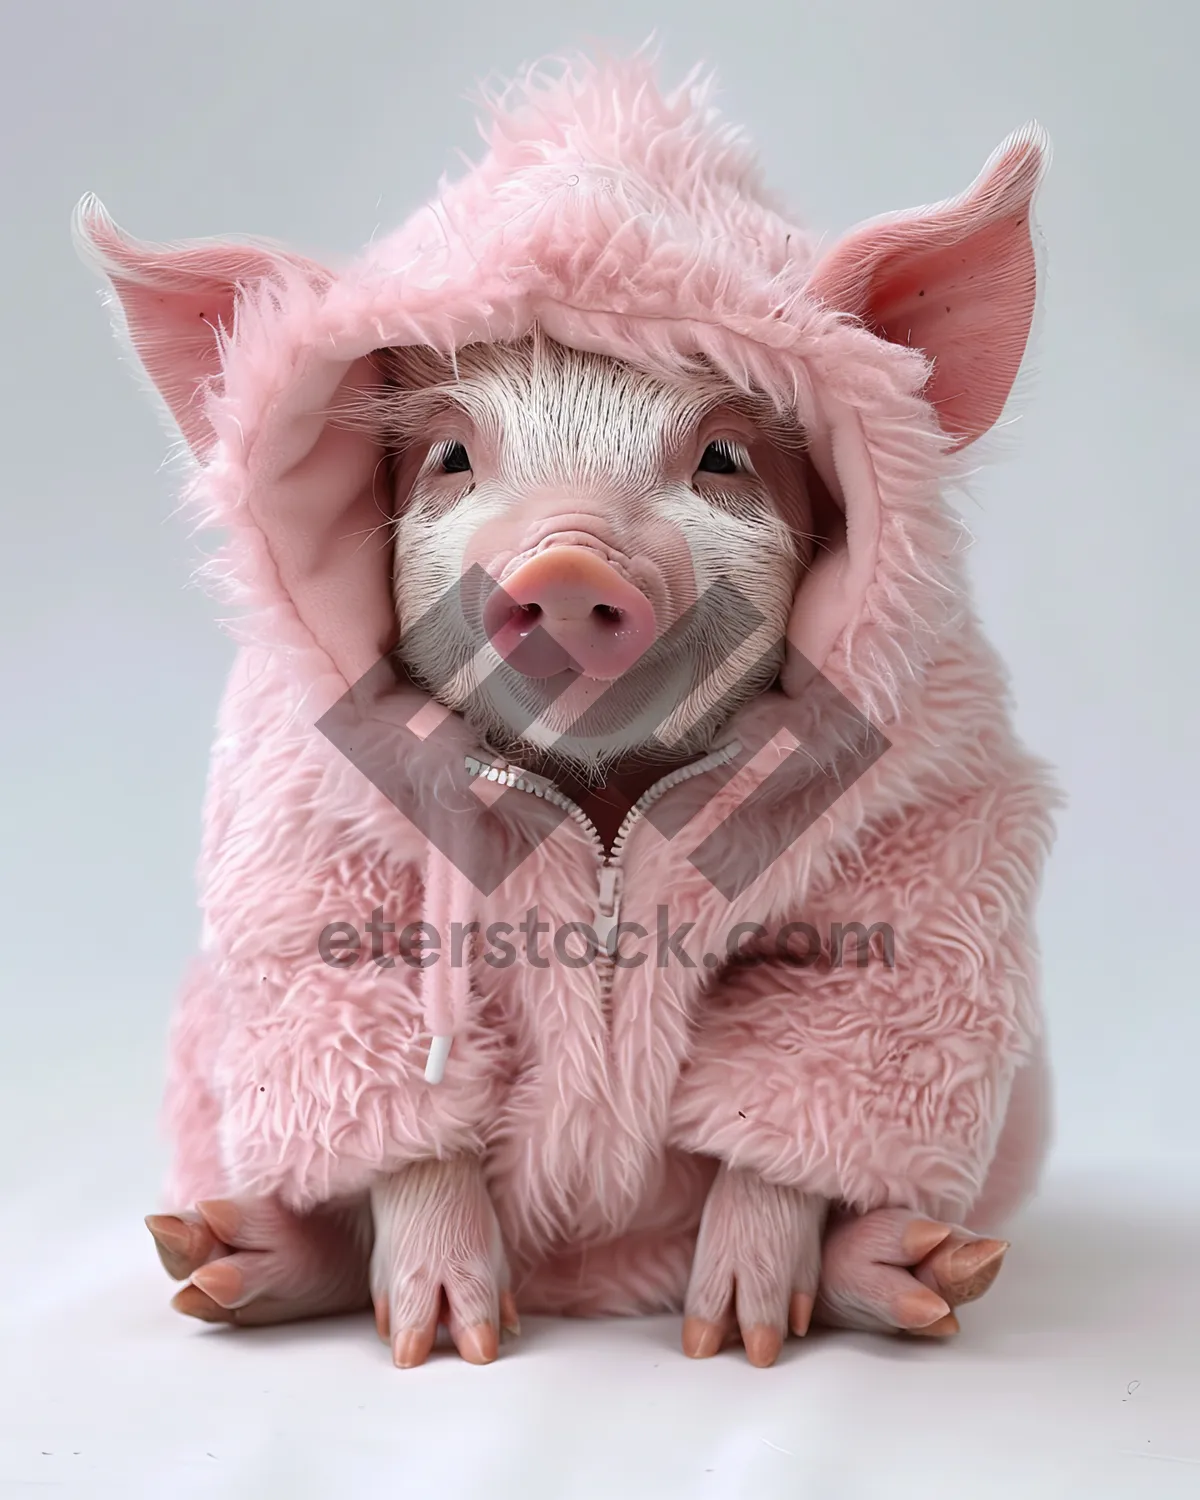 Picture of Funny baby pig with cute pink ears.